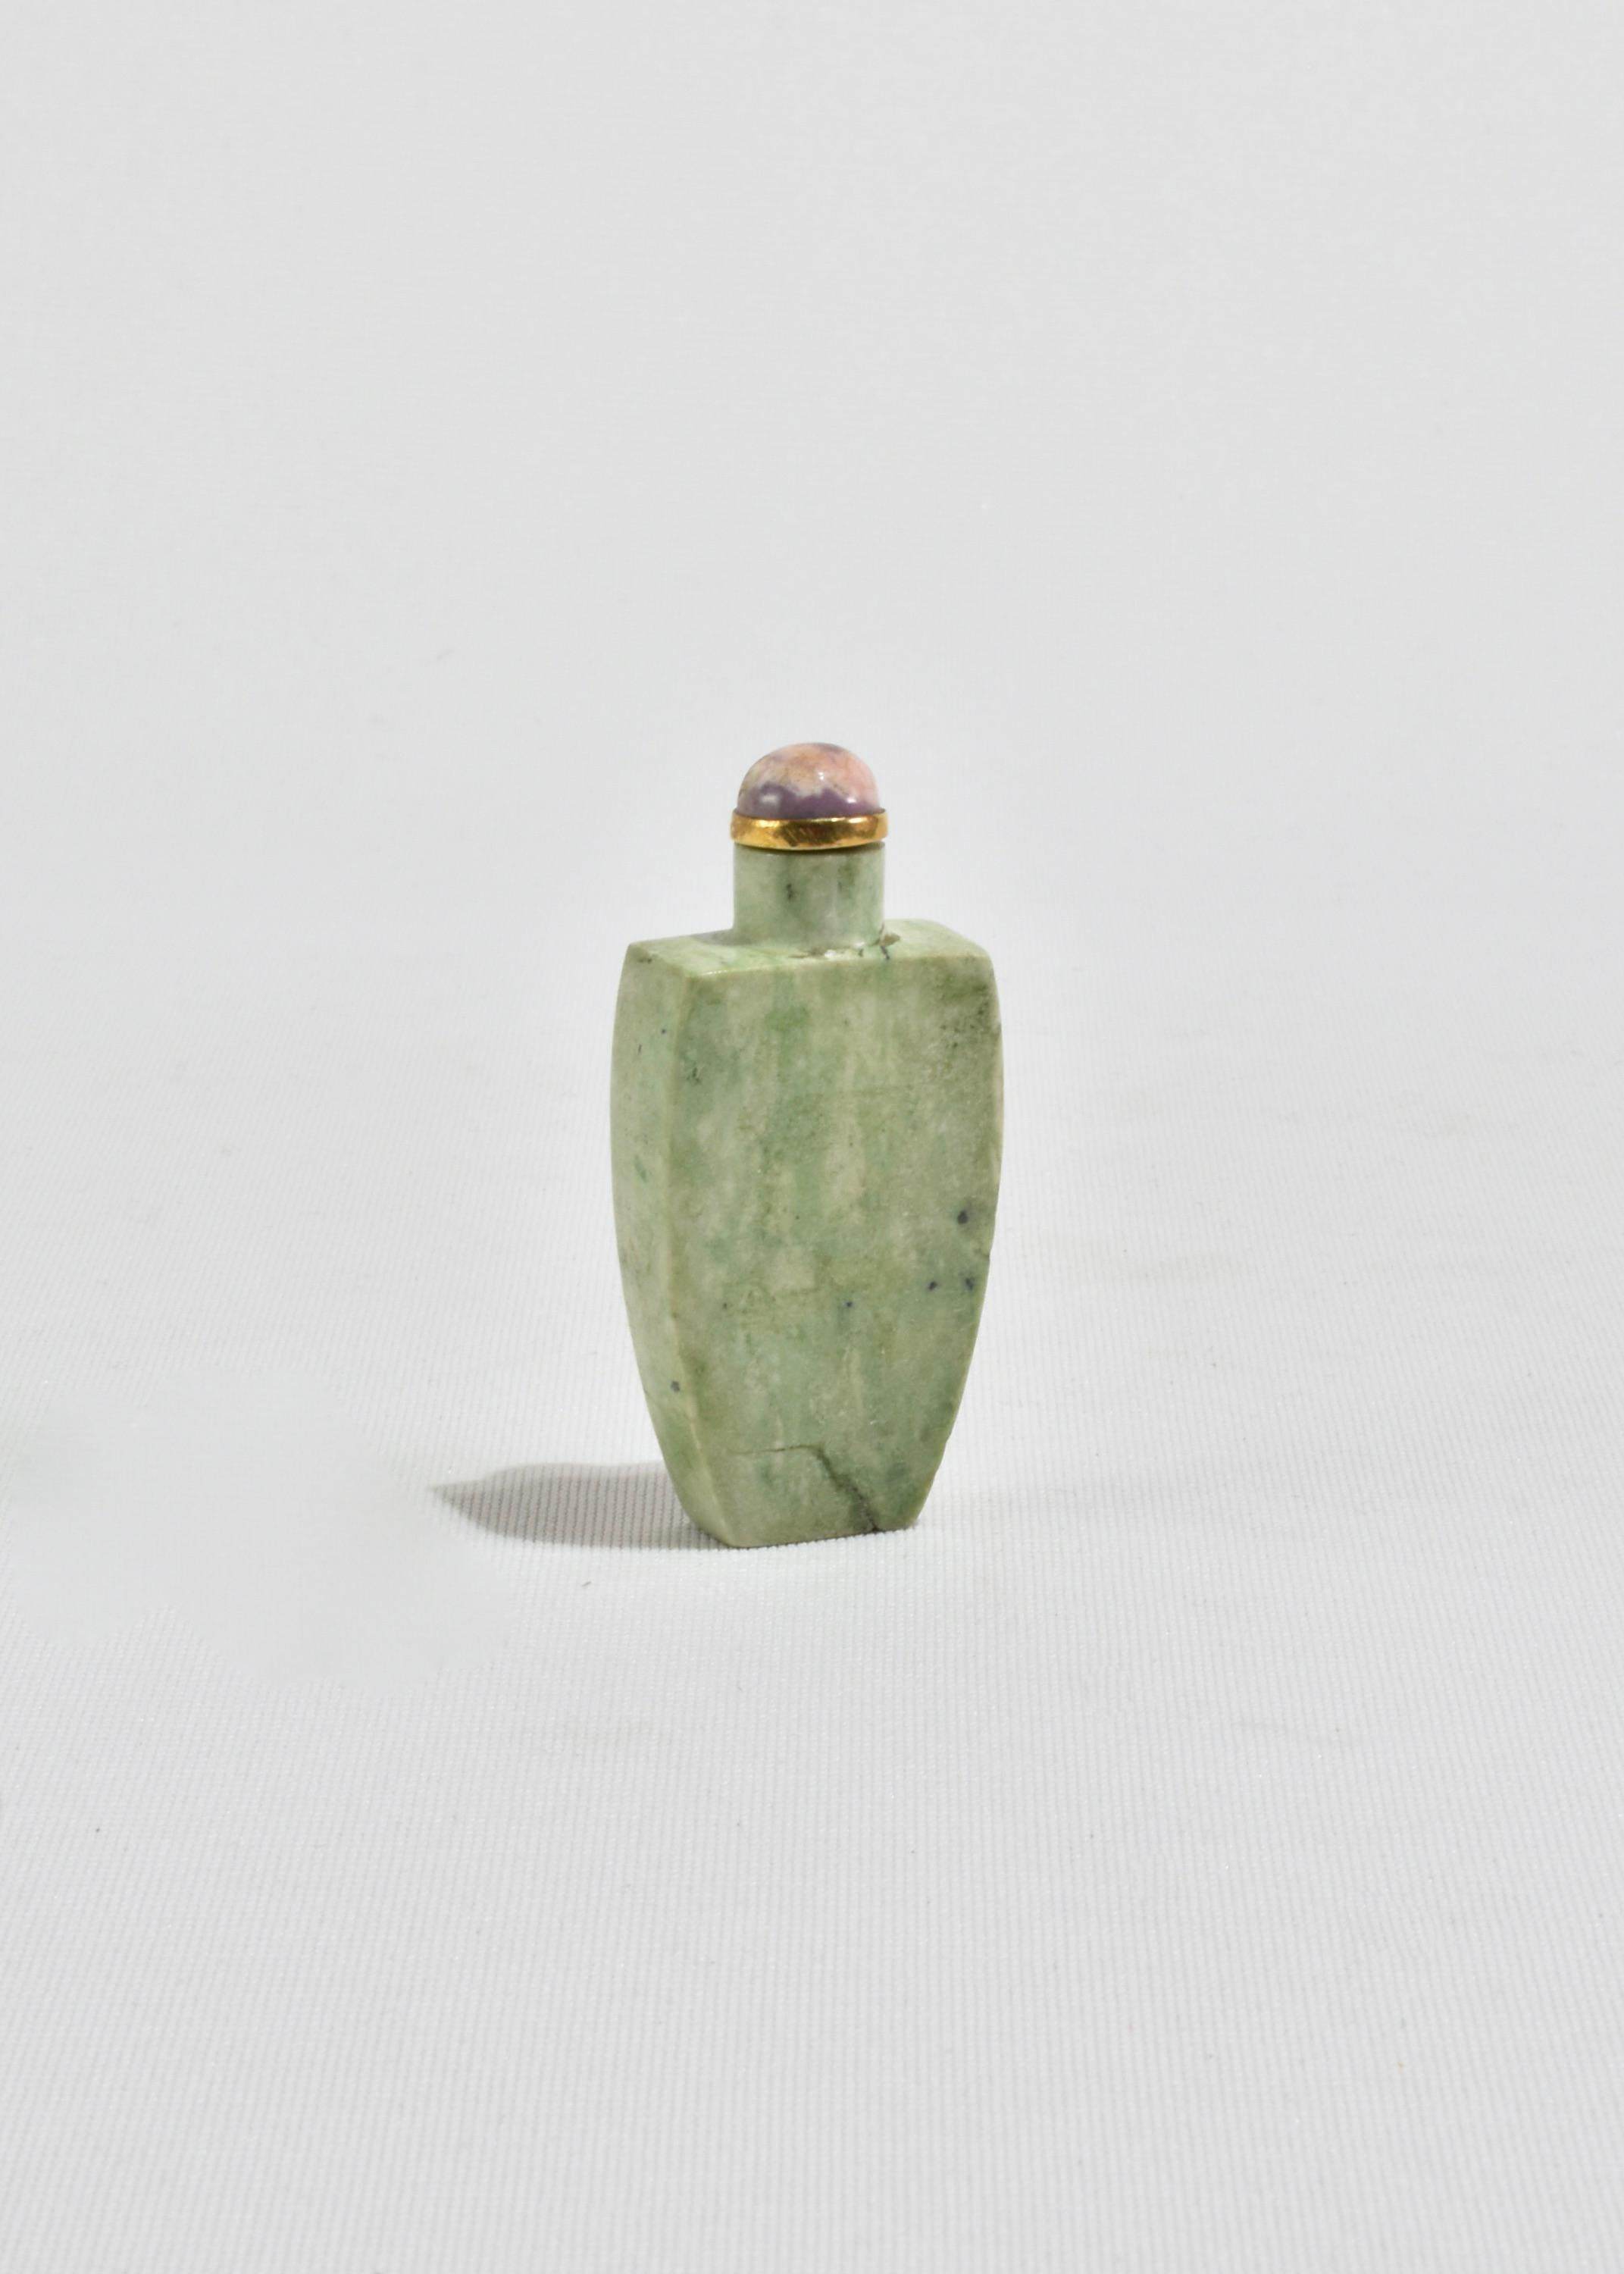 Stunning, vintage hand-carved Chinese snuff bottle in a beautiful green stone with brass detail and purple top. Display on its own as a decorative piece or fill with a favorite scent.